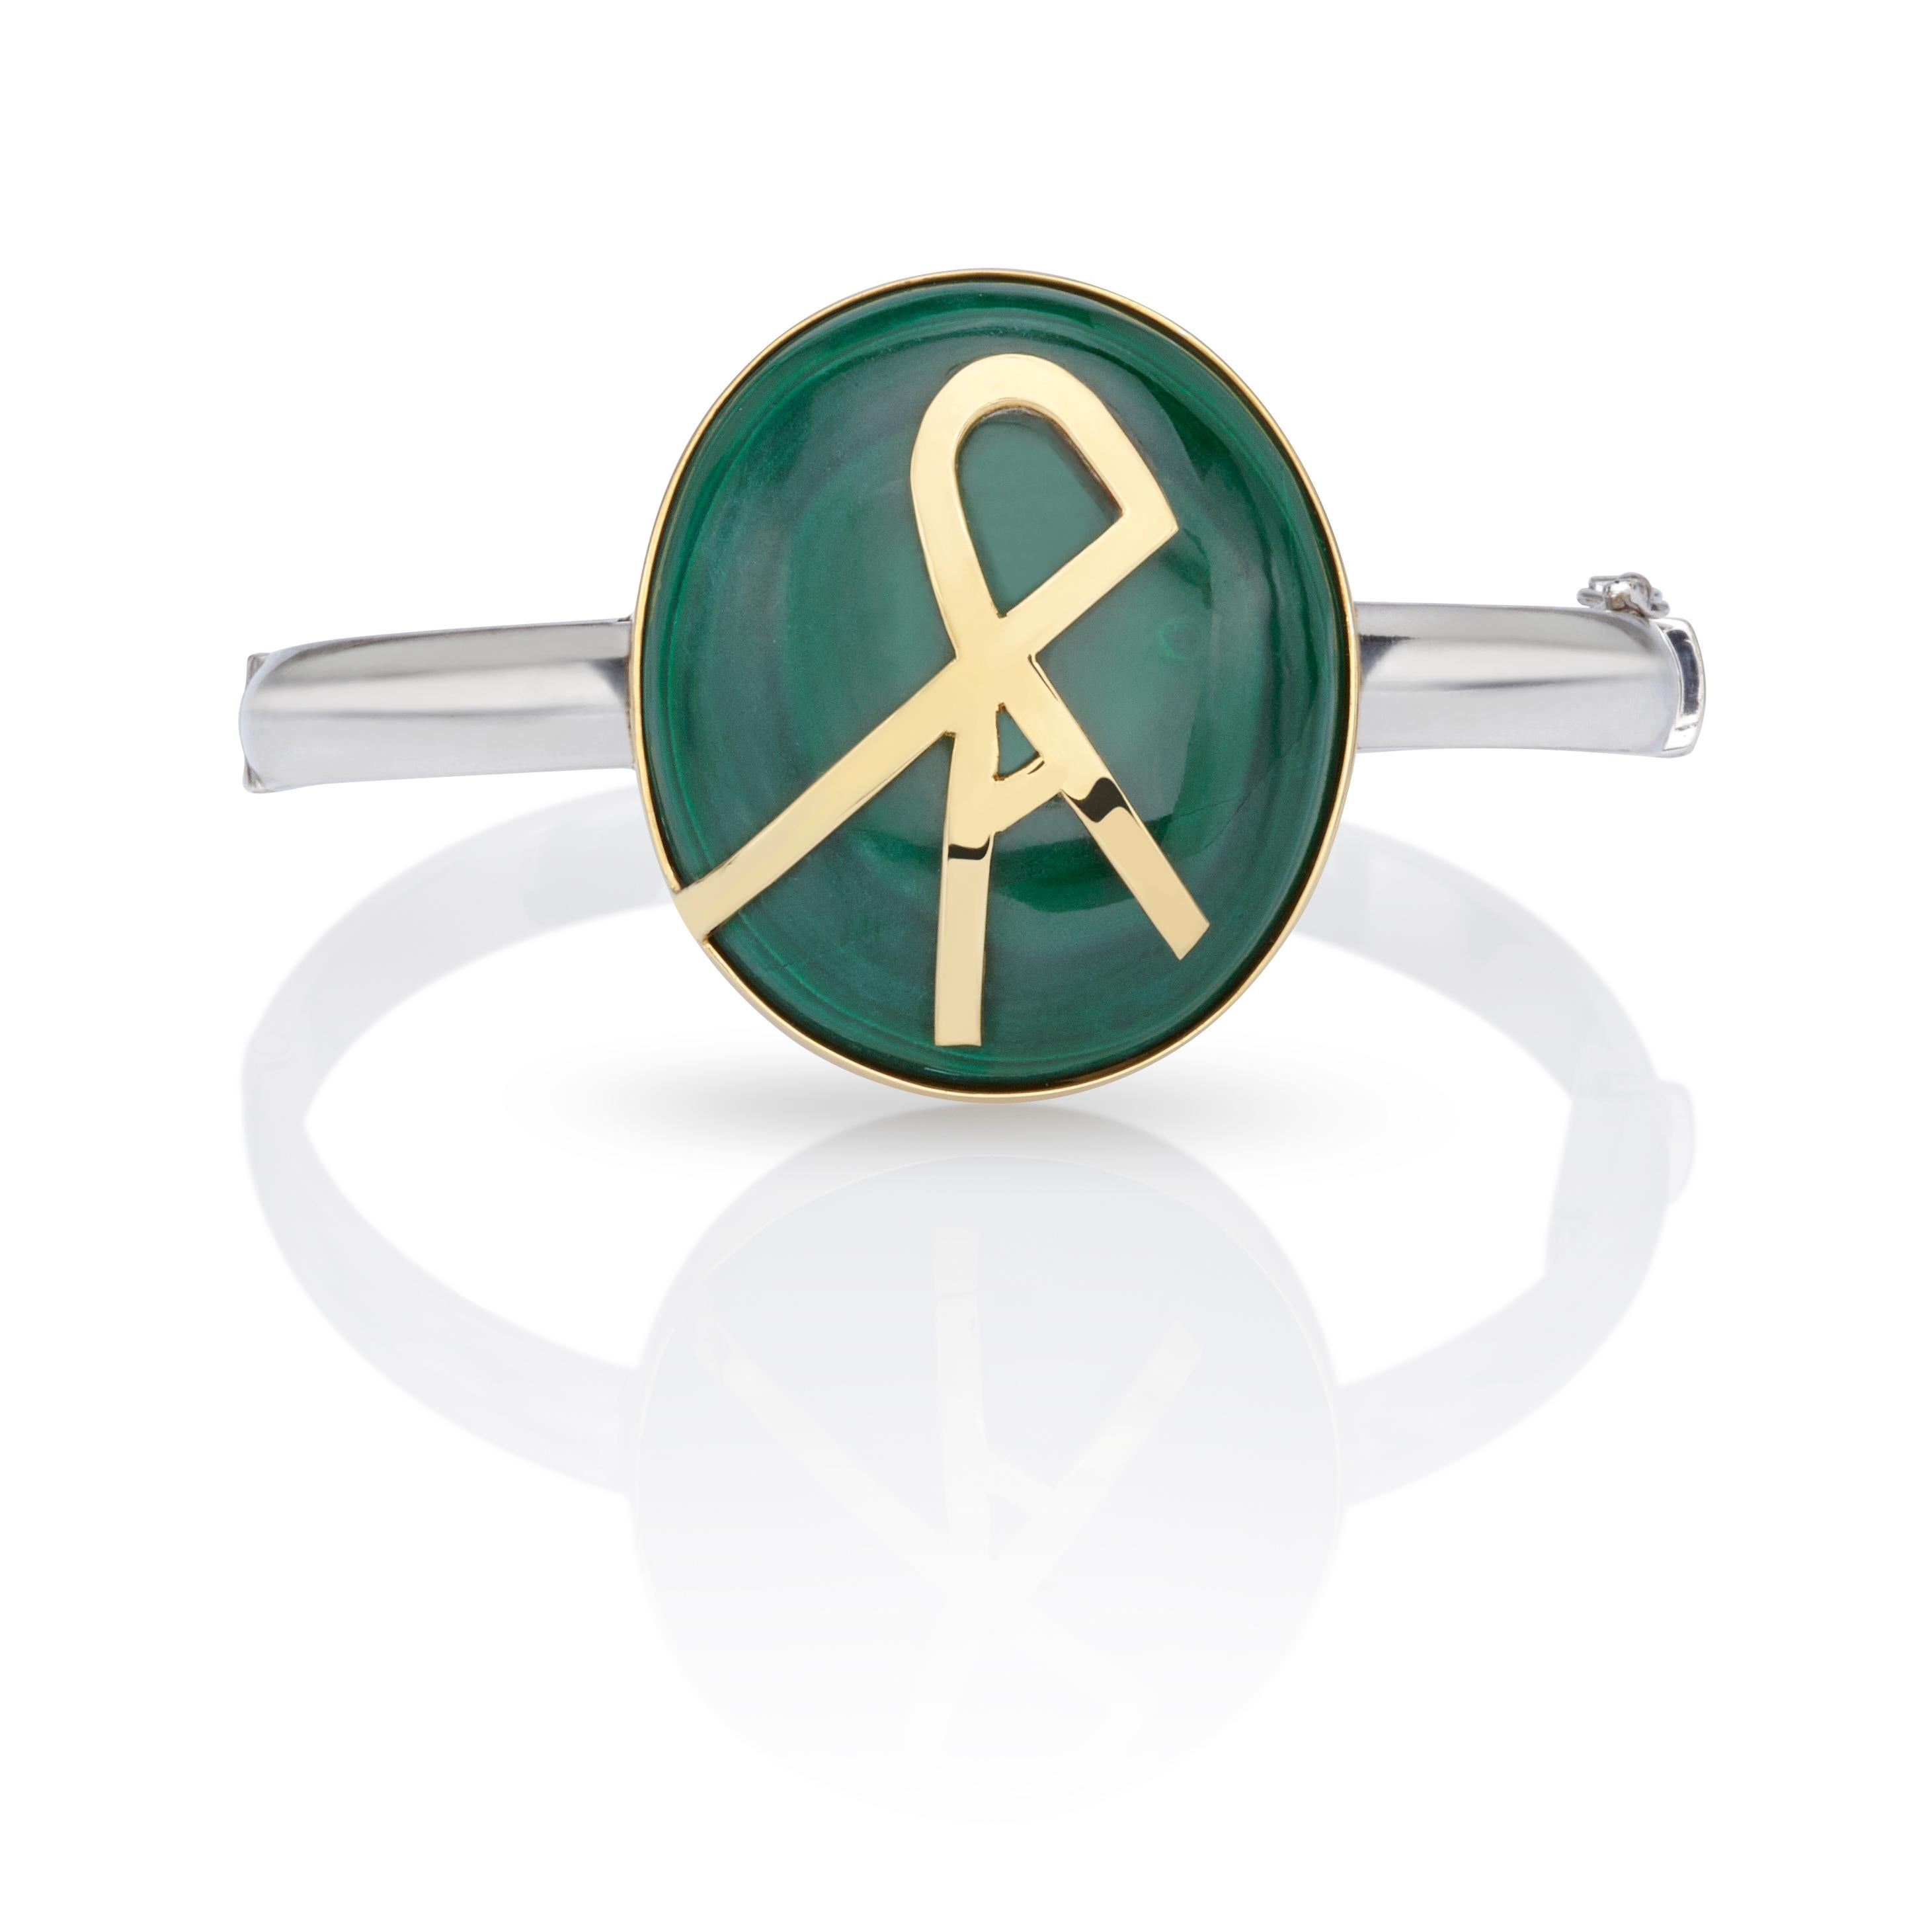 One of a kind Bangle 18Kt yellow gold & silver set with Green Malachite inlaid with a gold symbol KRA from 